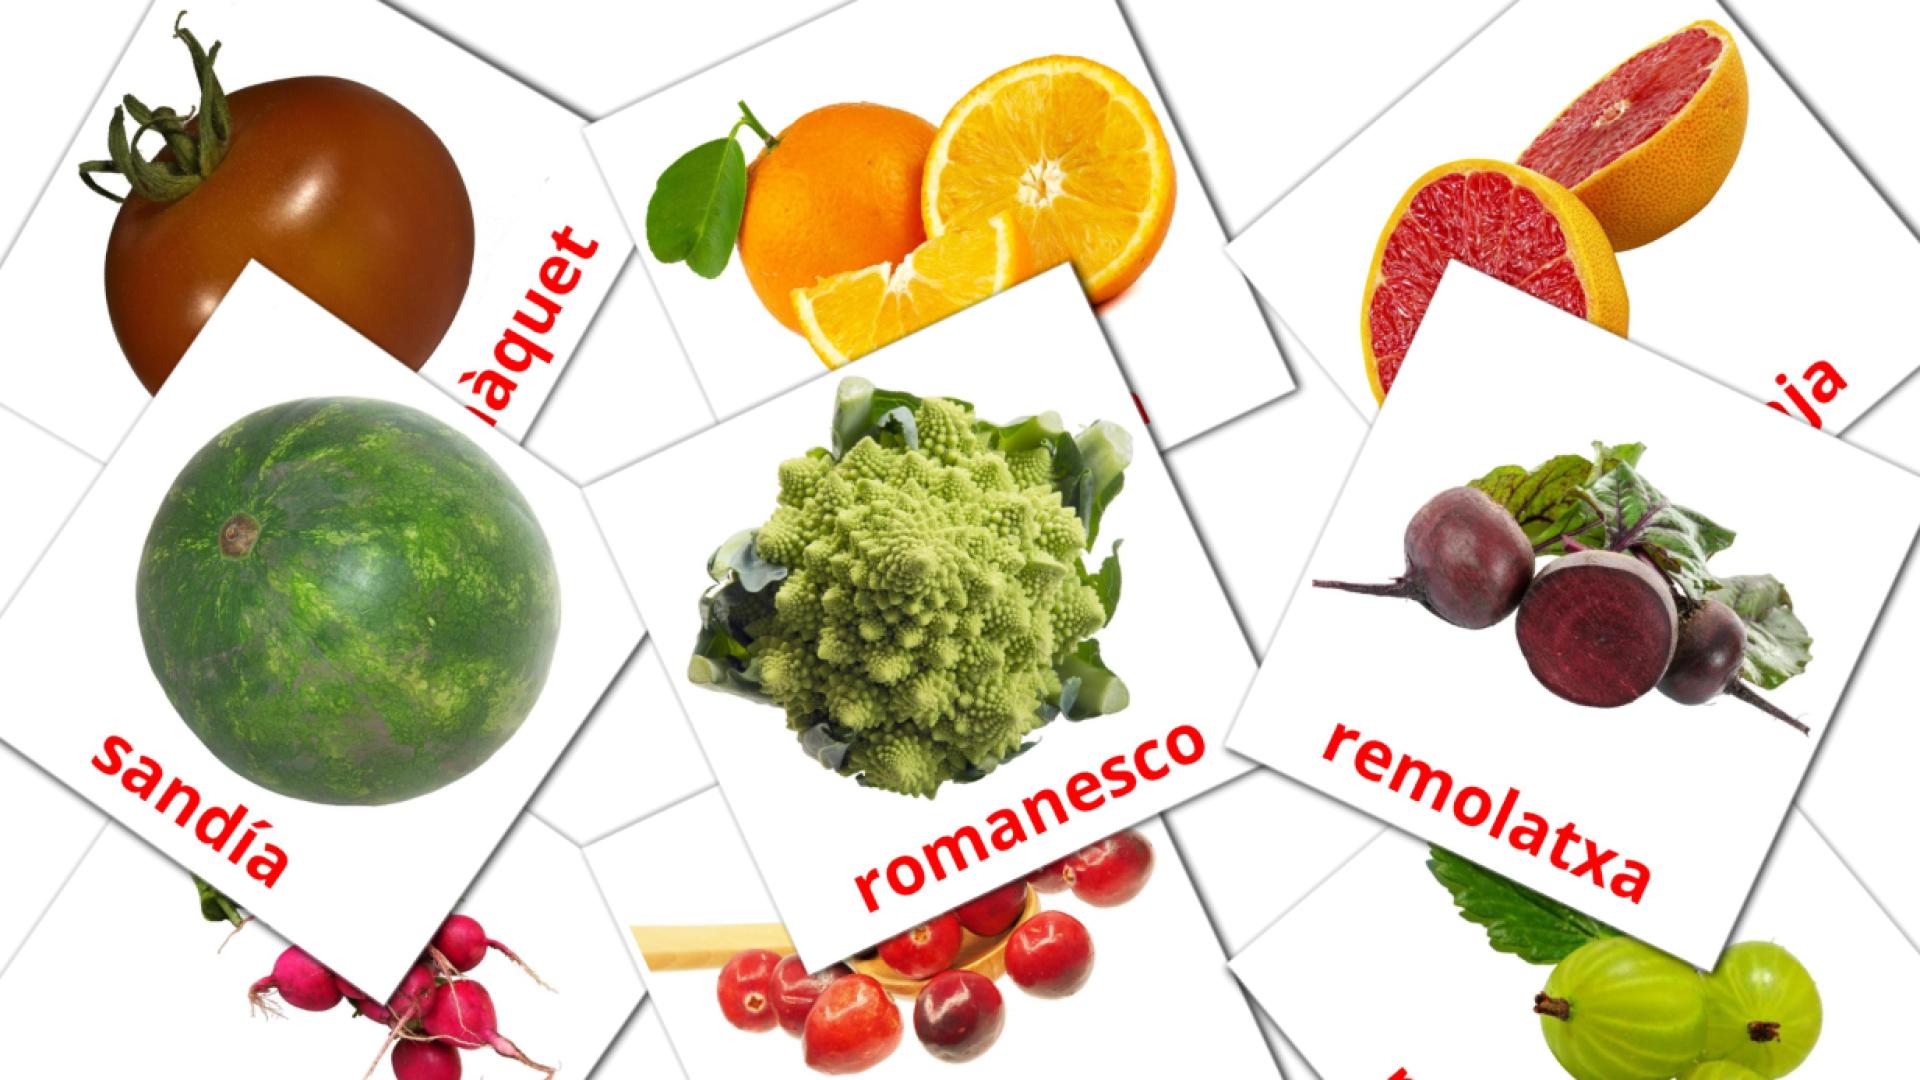 Aliments catalan vocabulary flashcards